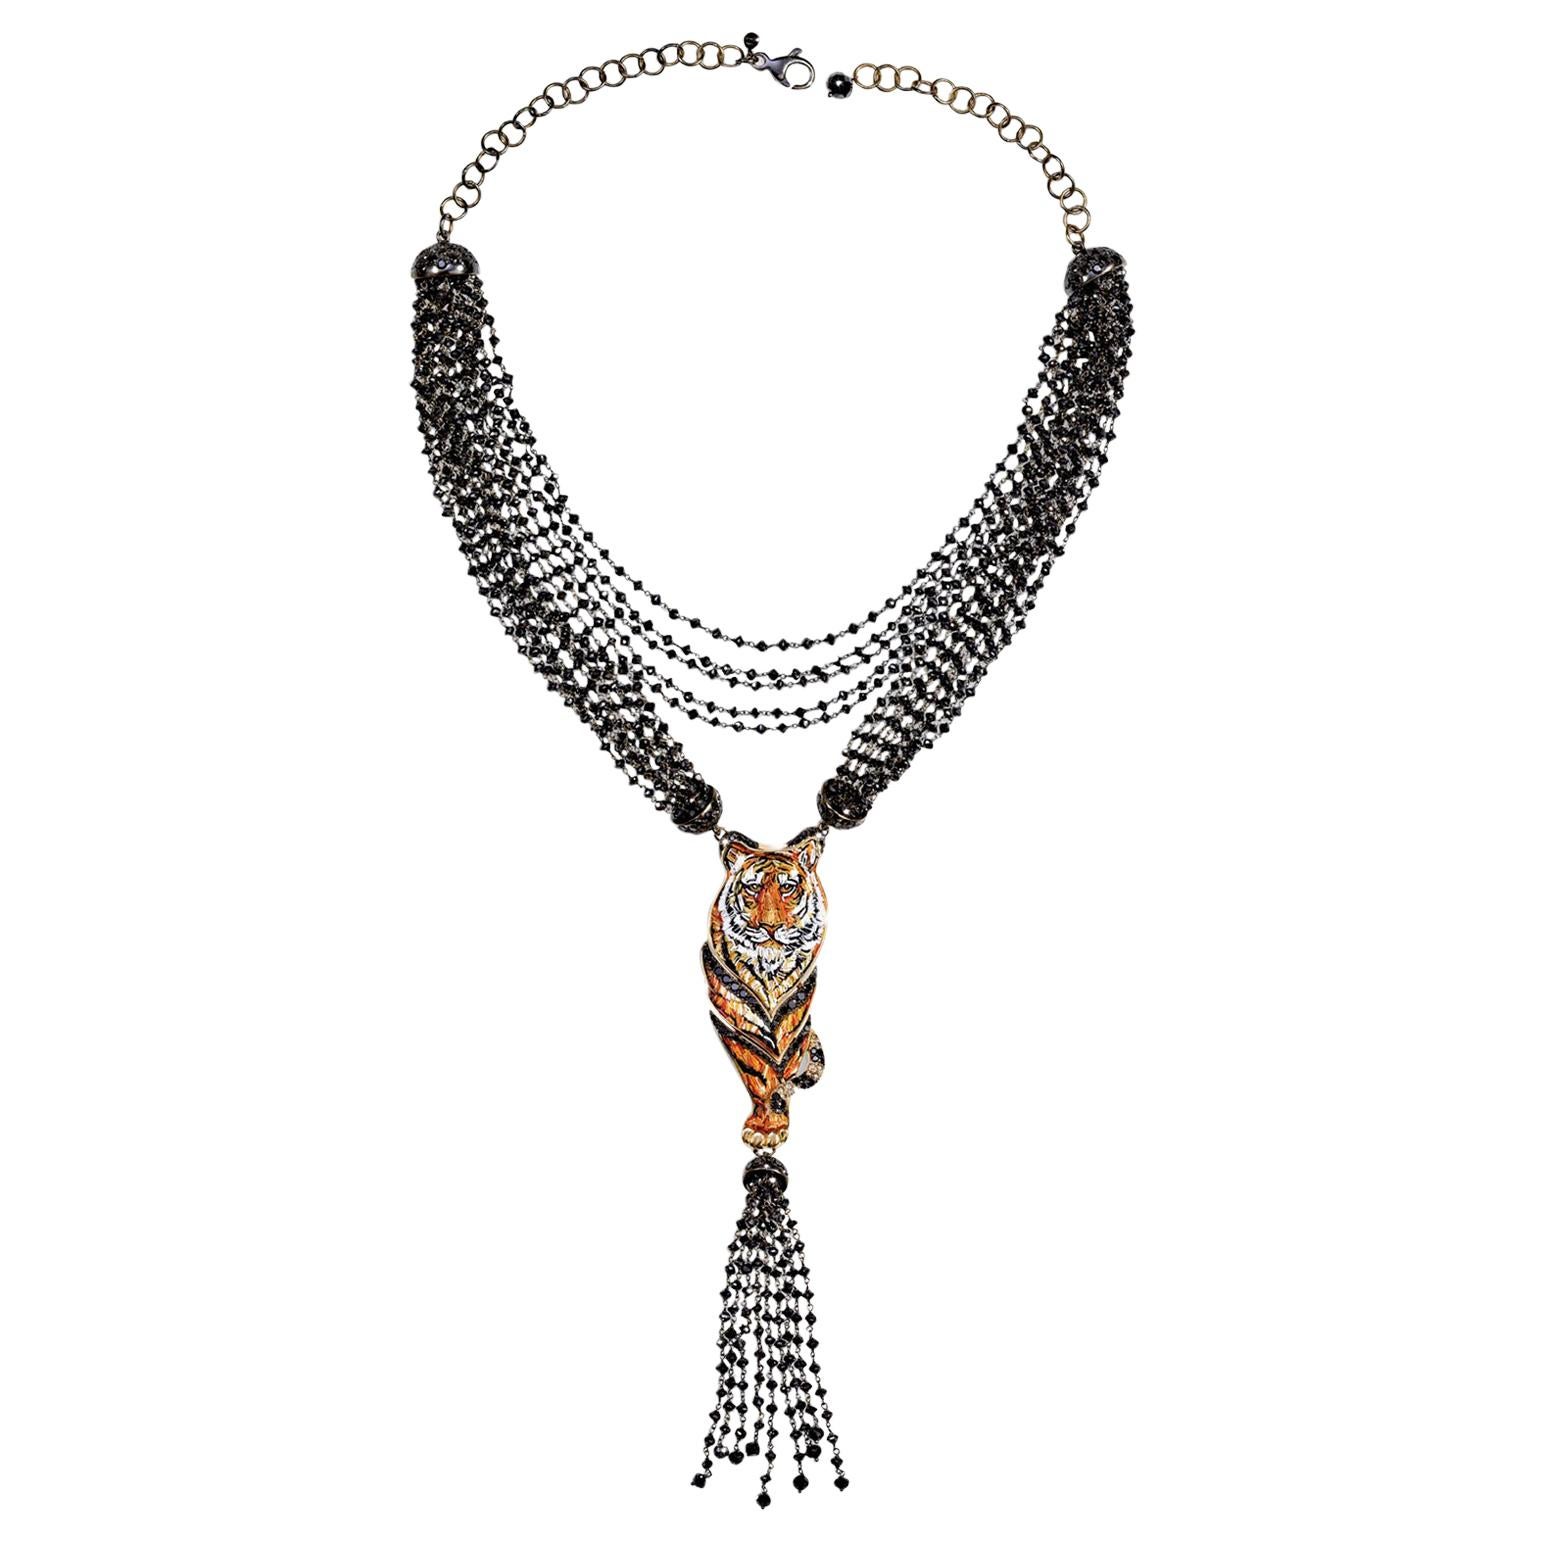 Necklace White Gold Black and Brown Diamonds Hand Decorated with Micro Mosaic